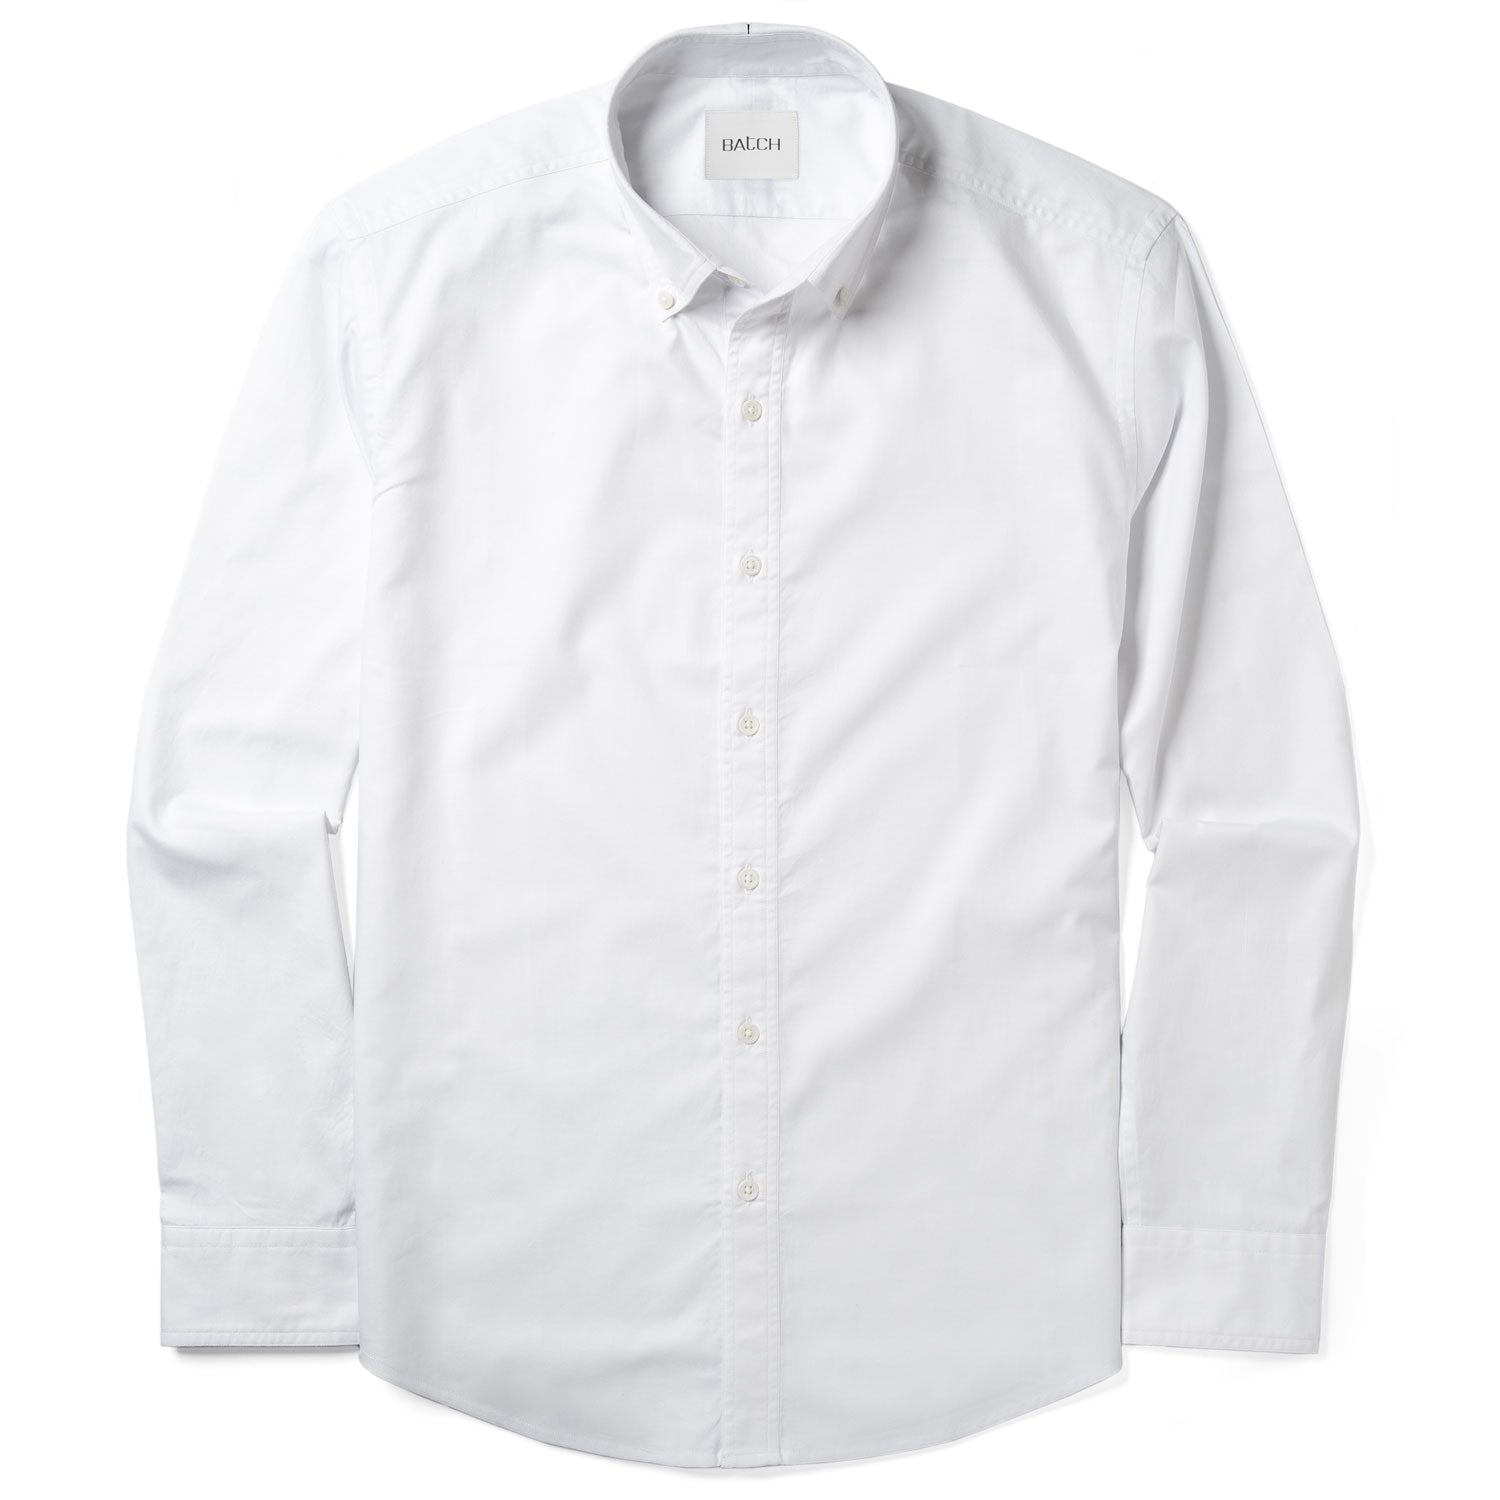 Essential Casual Shirt - Classic White Cotton Twill